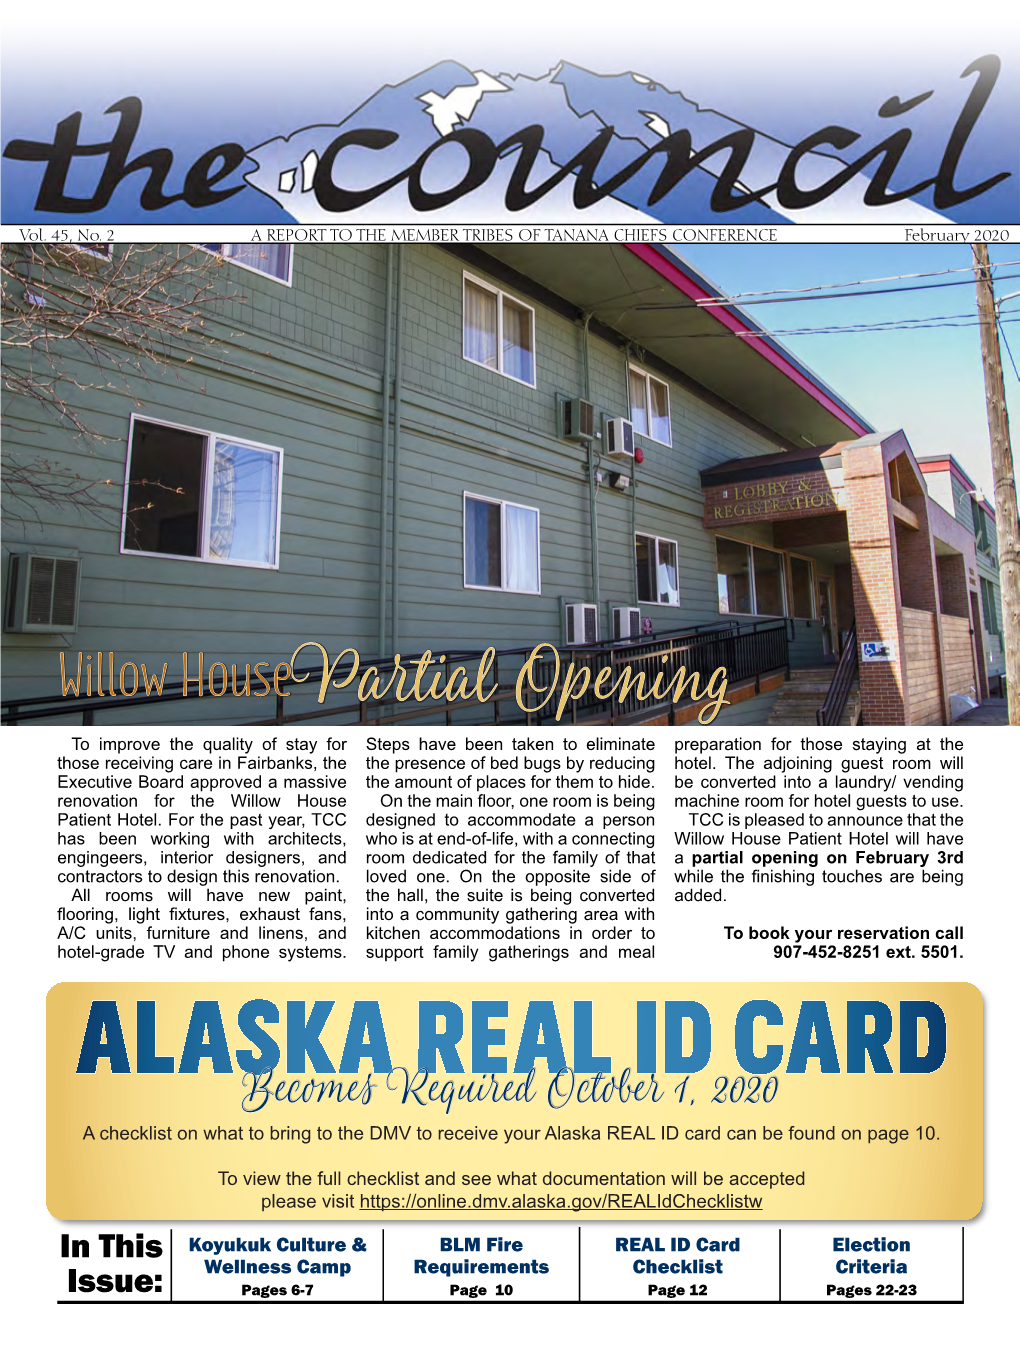 Alaska REAL ID Card Can Be Found on Page 10